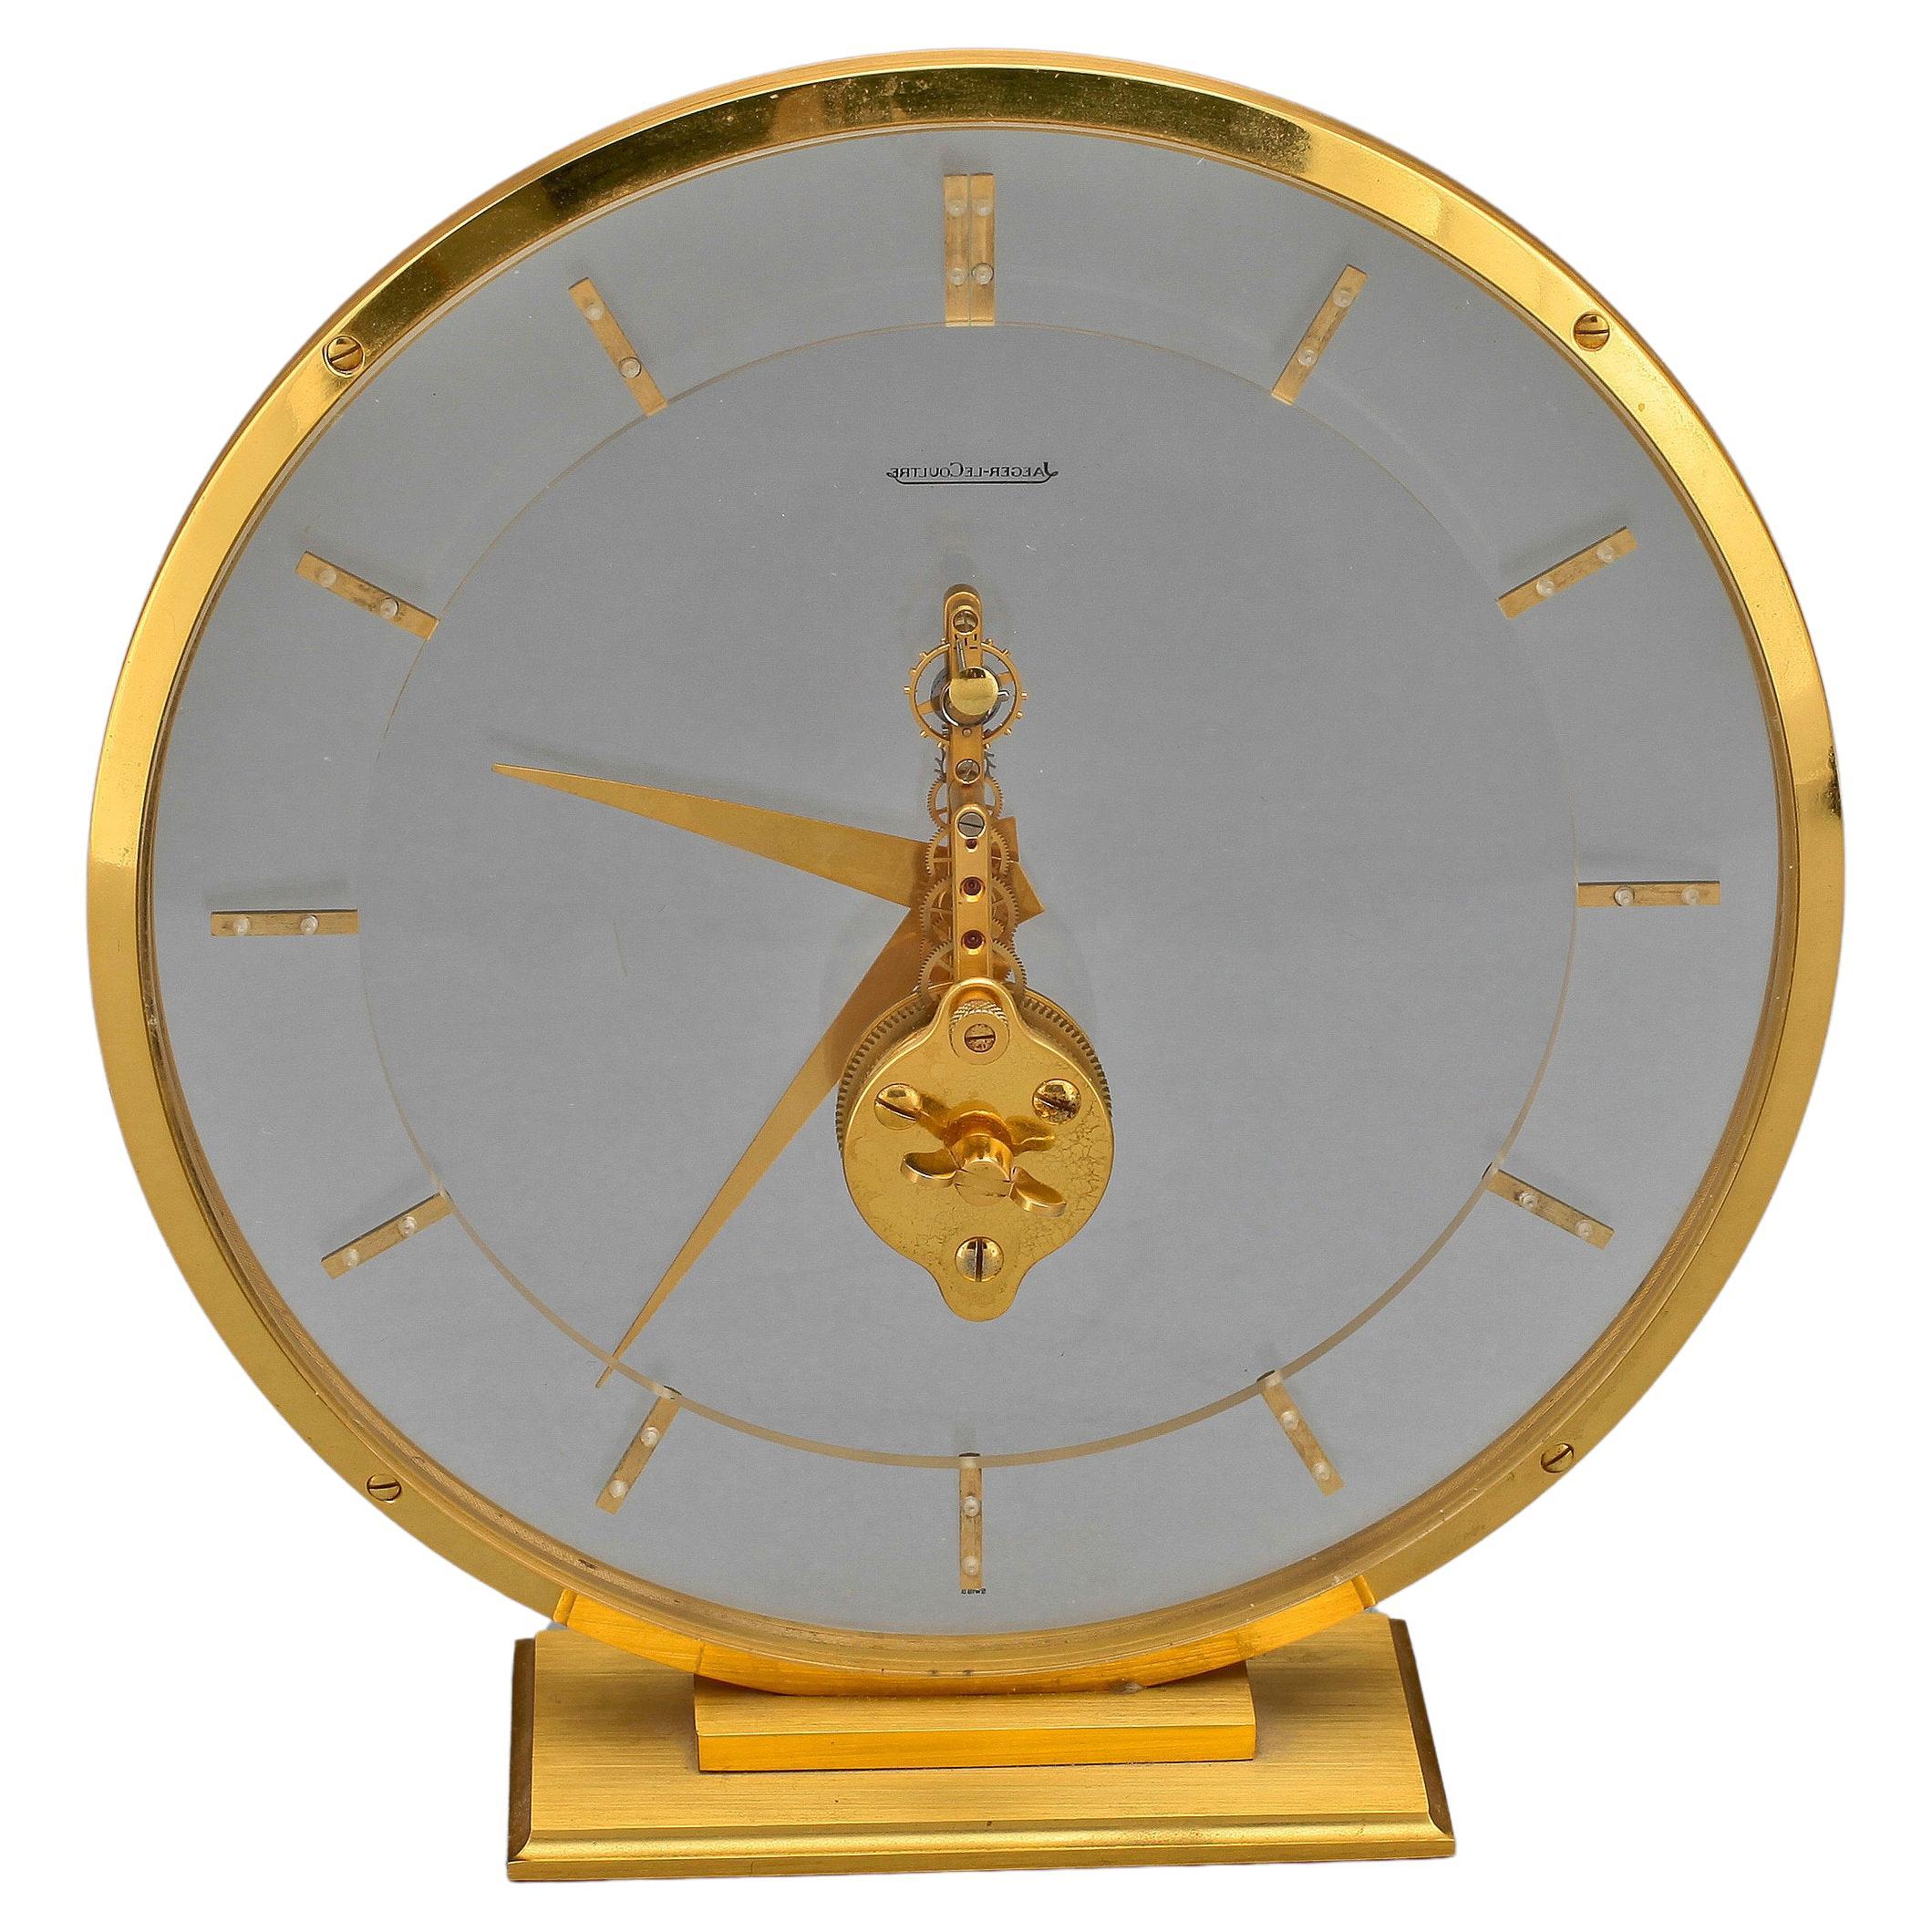 Very rare lucite and brass round skeleton clock from Jaeger-LeCoultre, with a clean, minimalist design that fits any environment. The beauty of these skeleton clocks is its transparency,  you can see the 16-jewel Swiss movement running and watch the